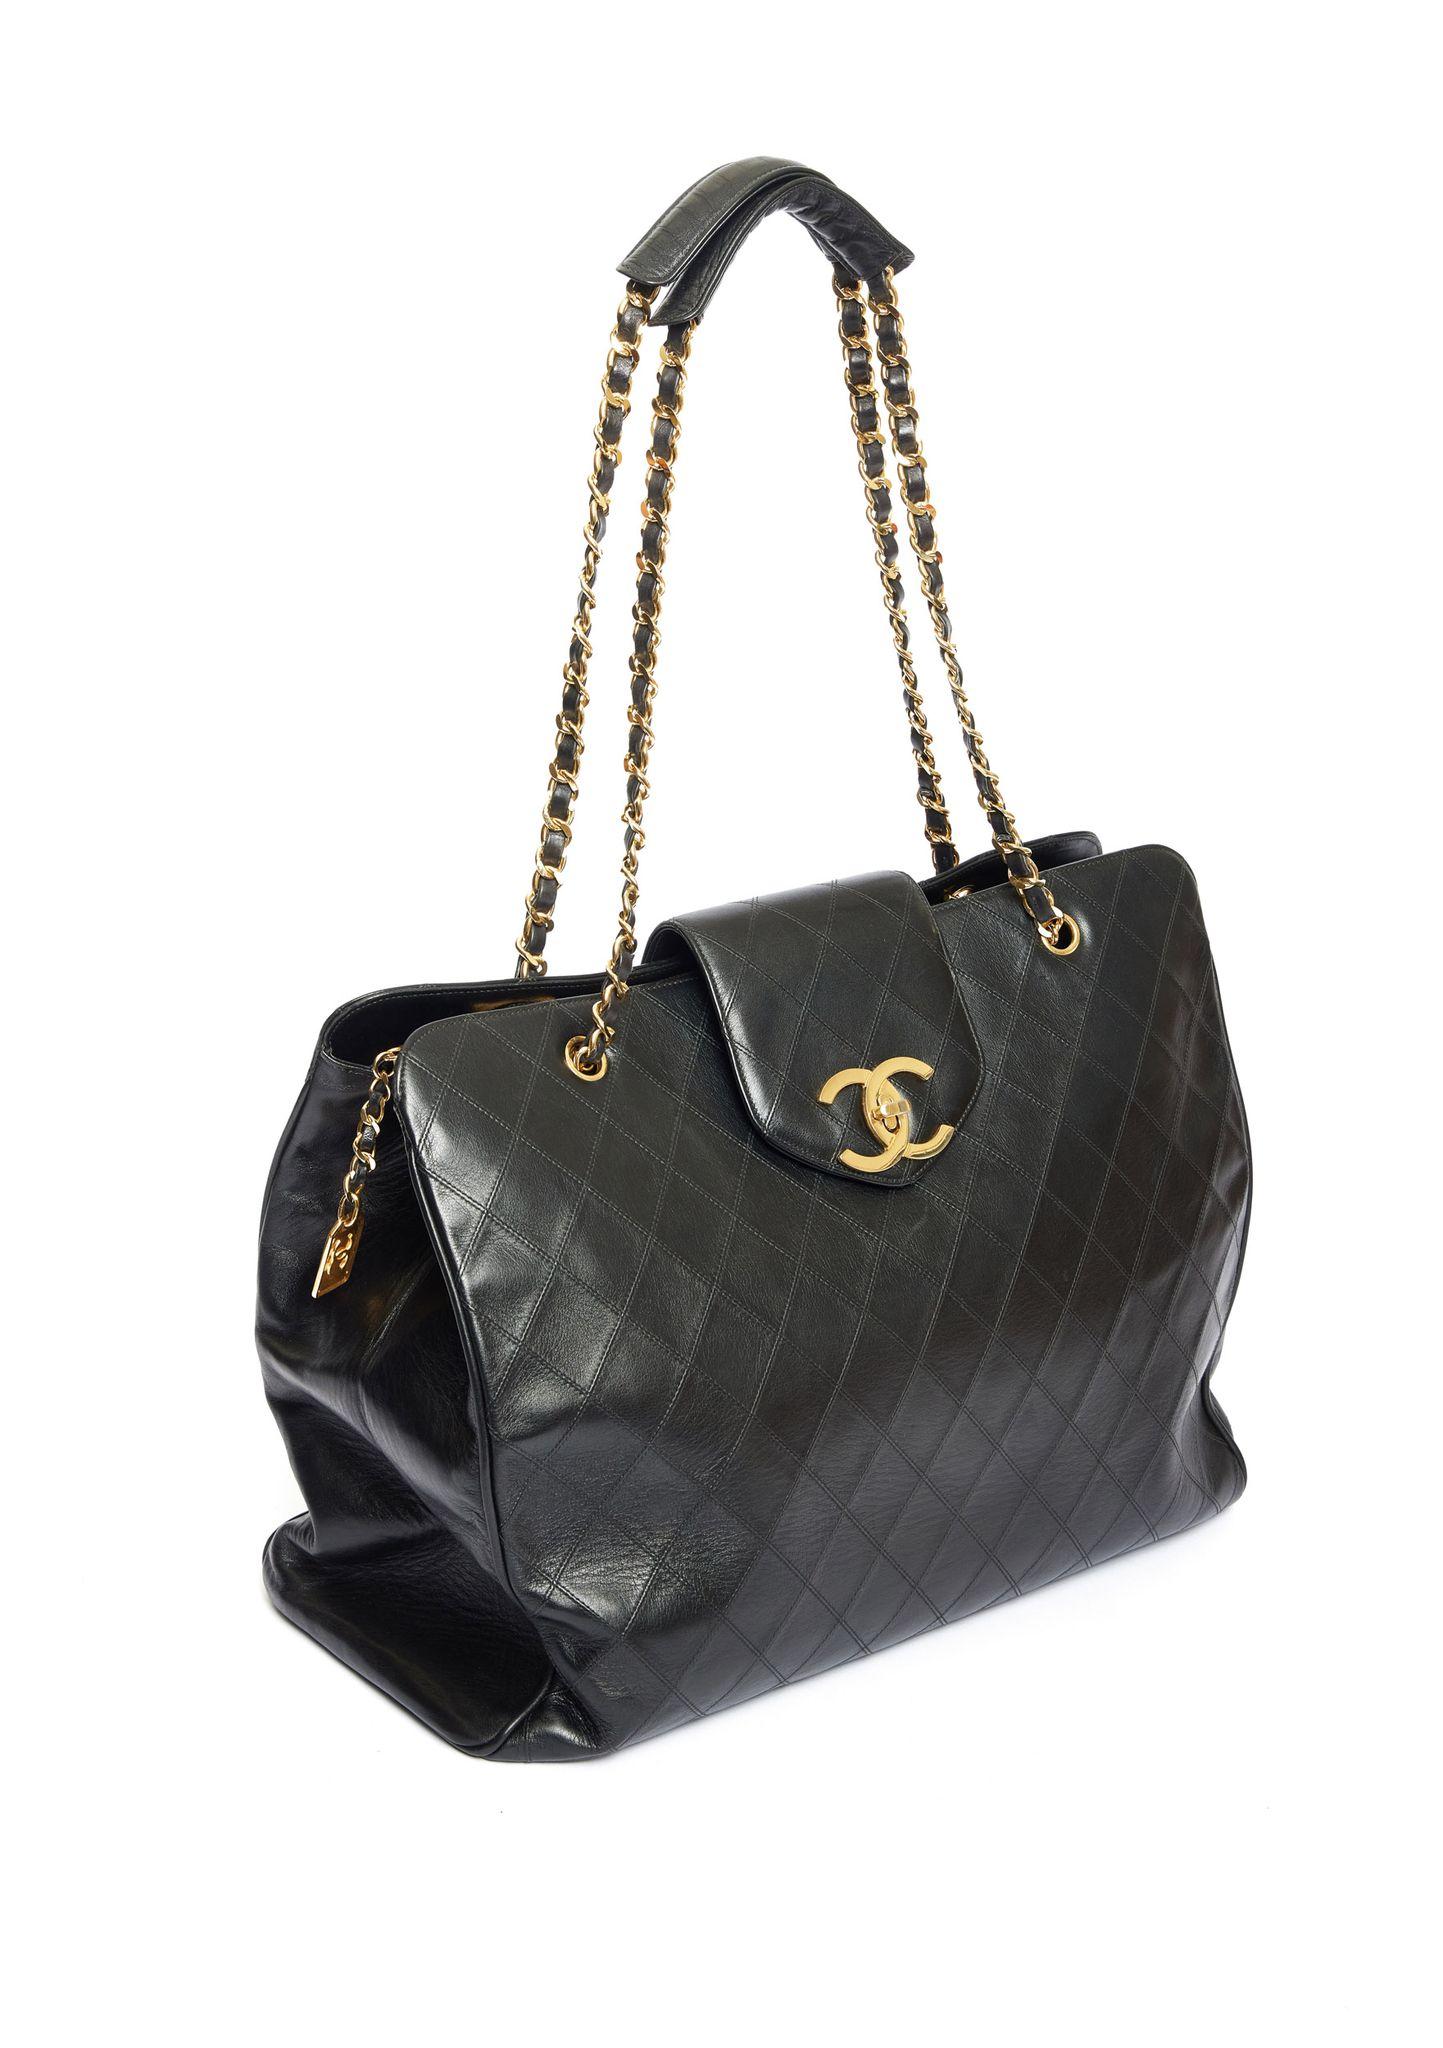 Chanel Black Caviar Supermodel Weekender In Excellent Condition For Sale In West Hollywood, CA